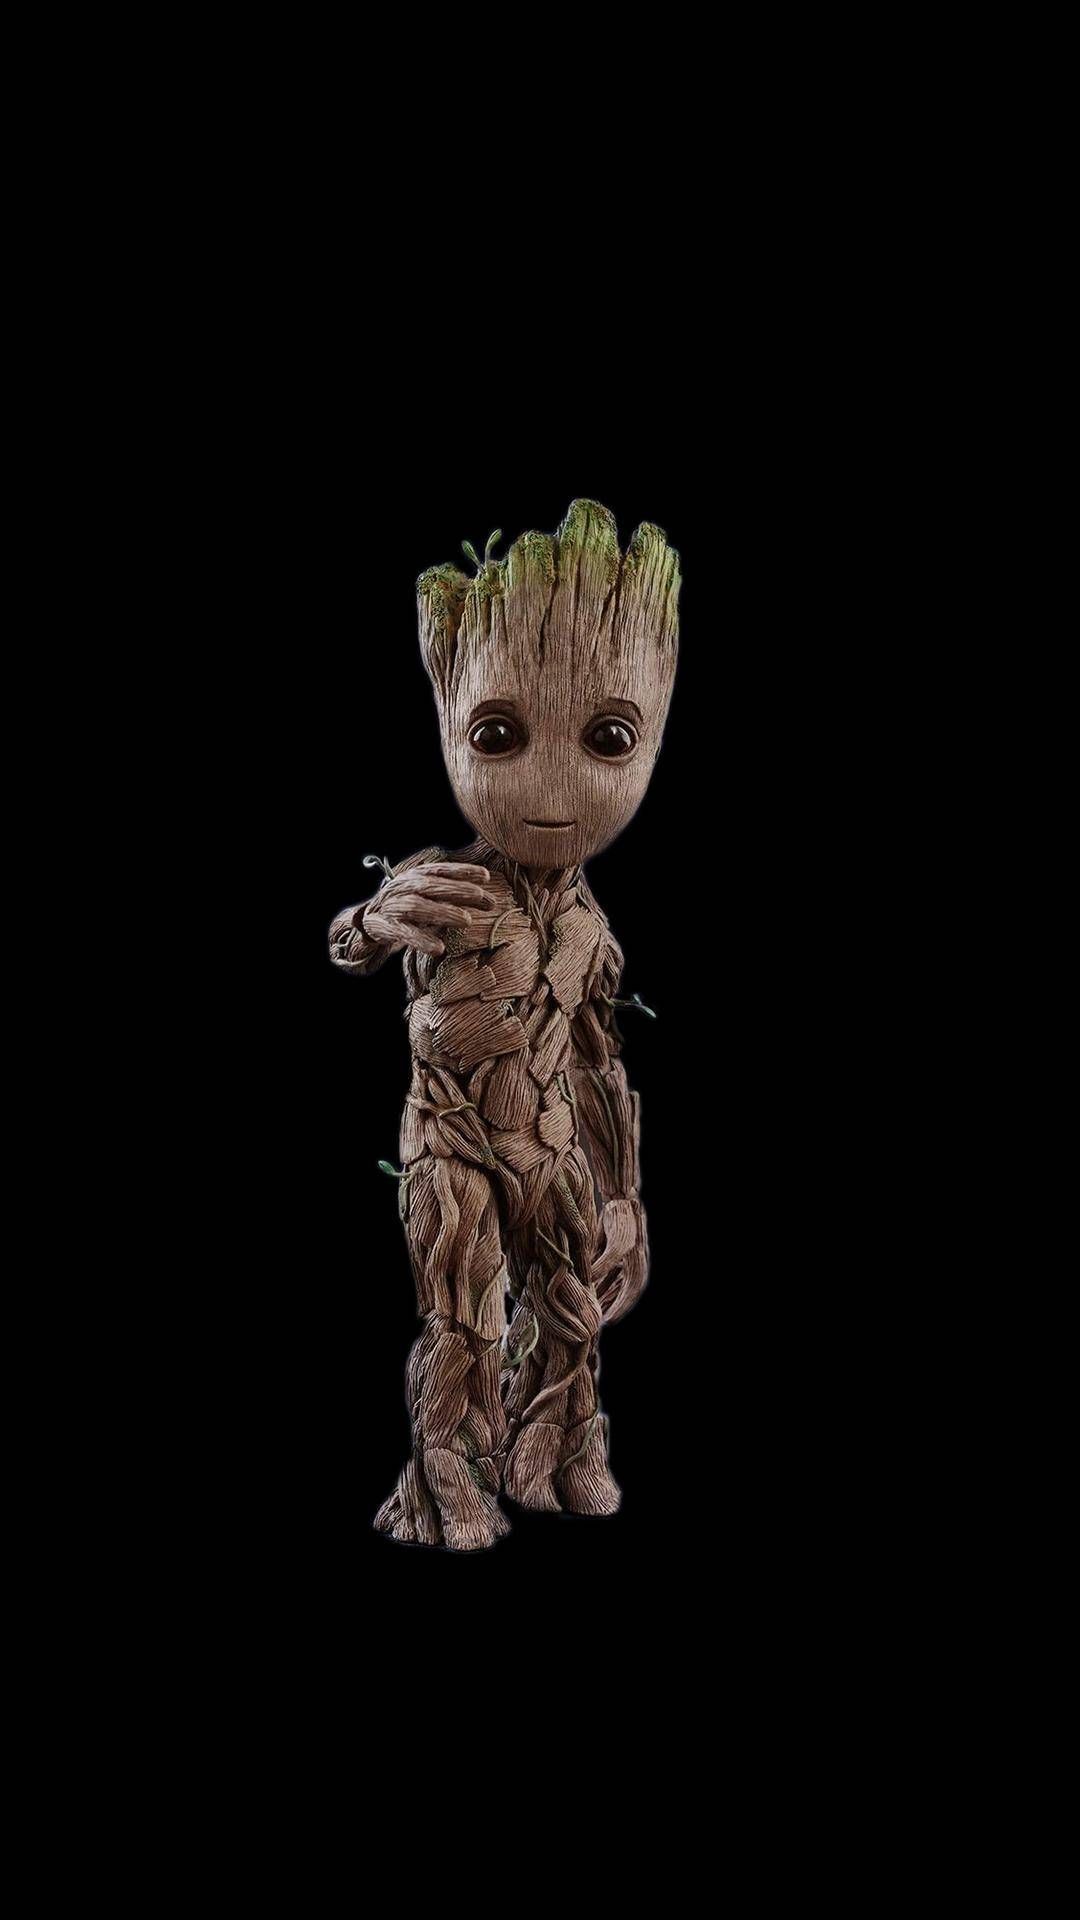 I Am Groot Wallpapers